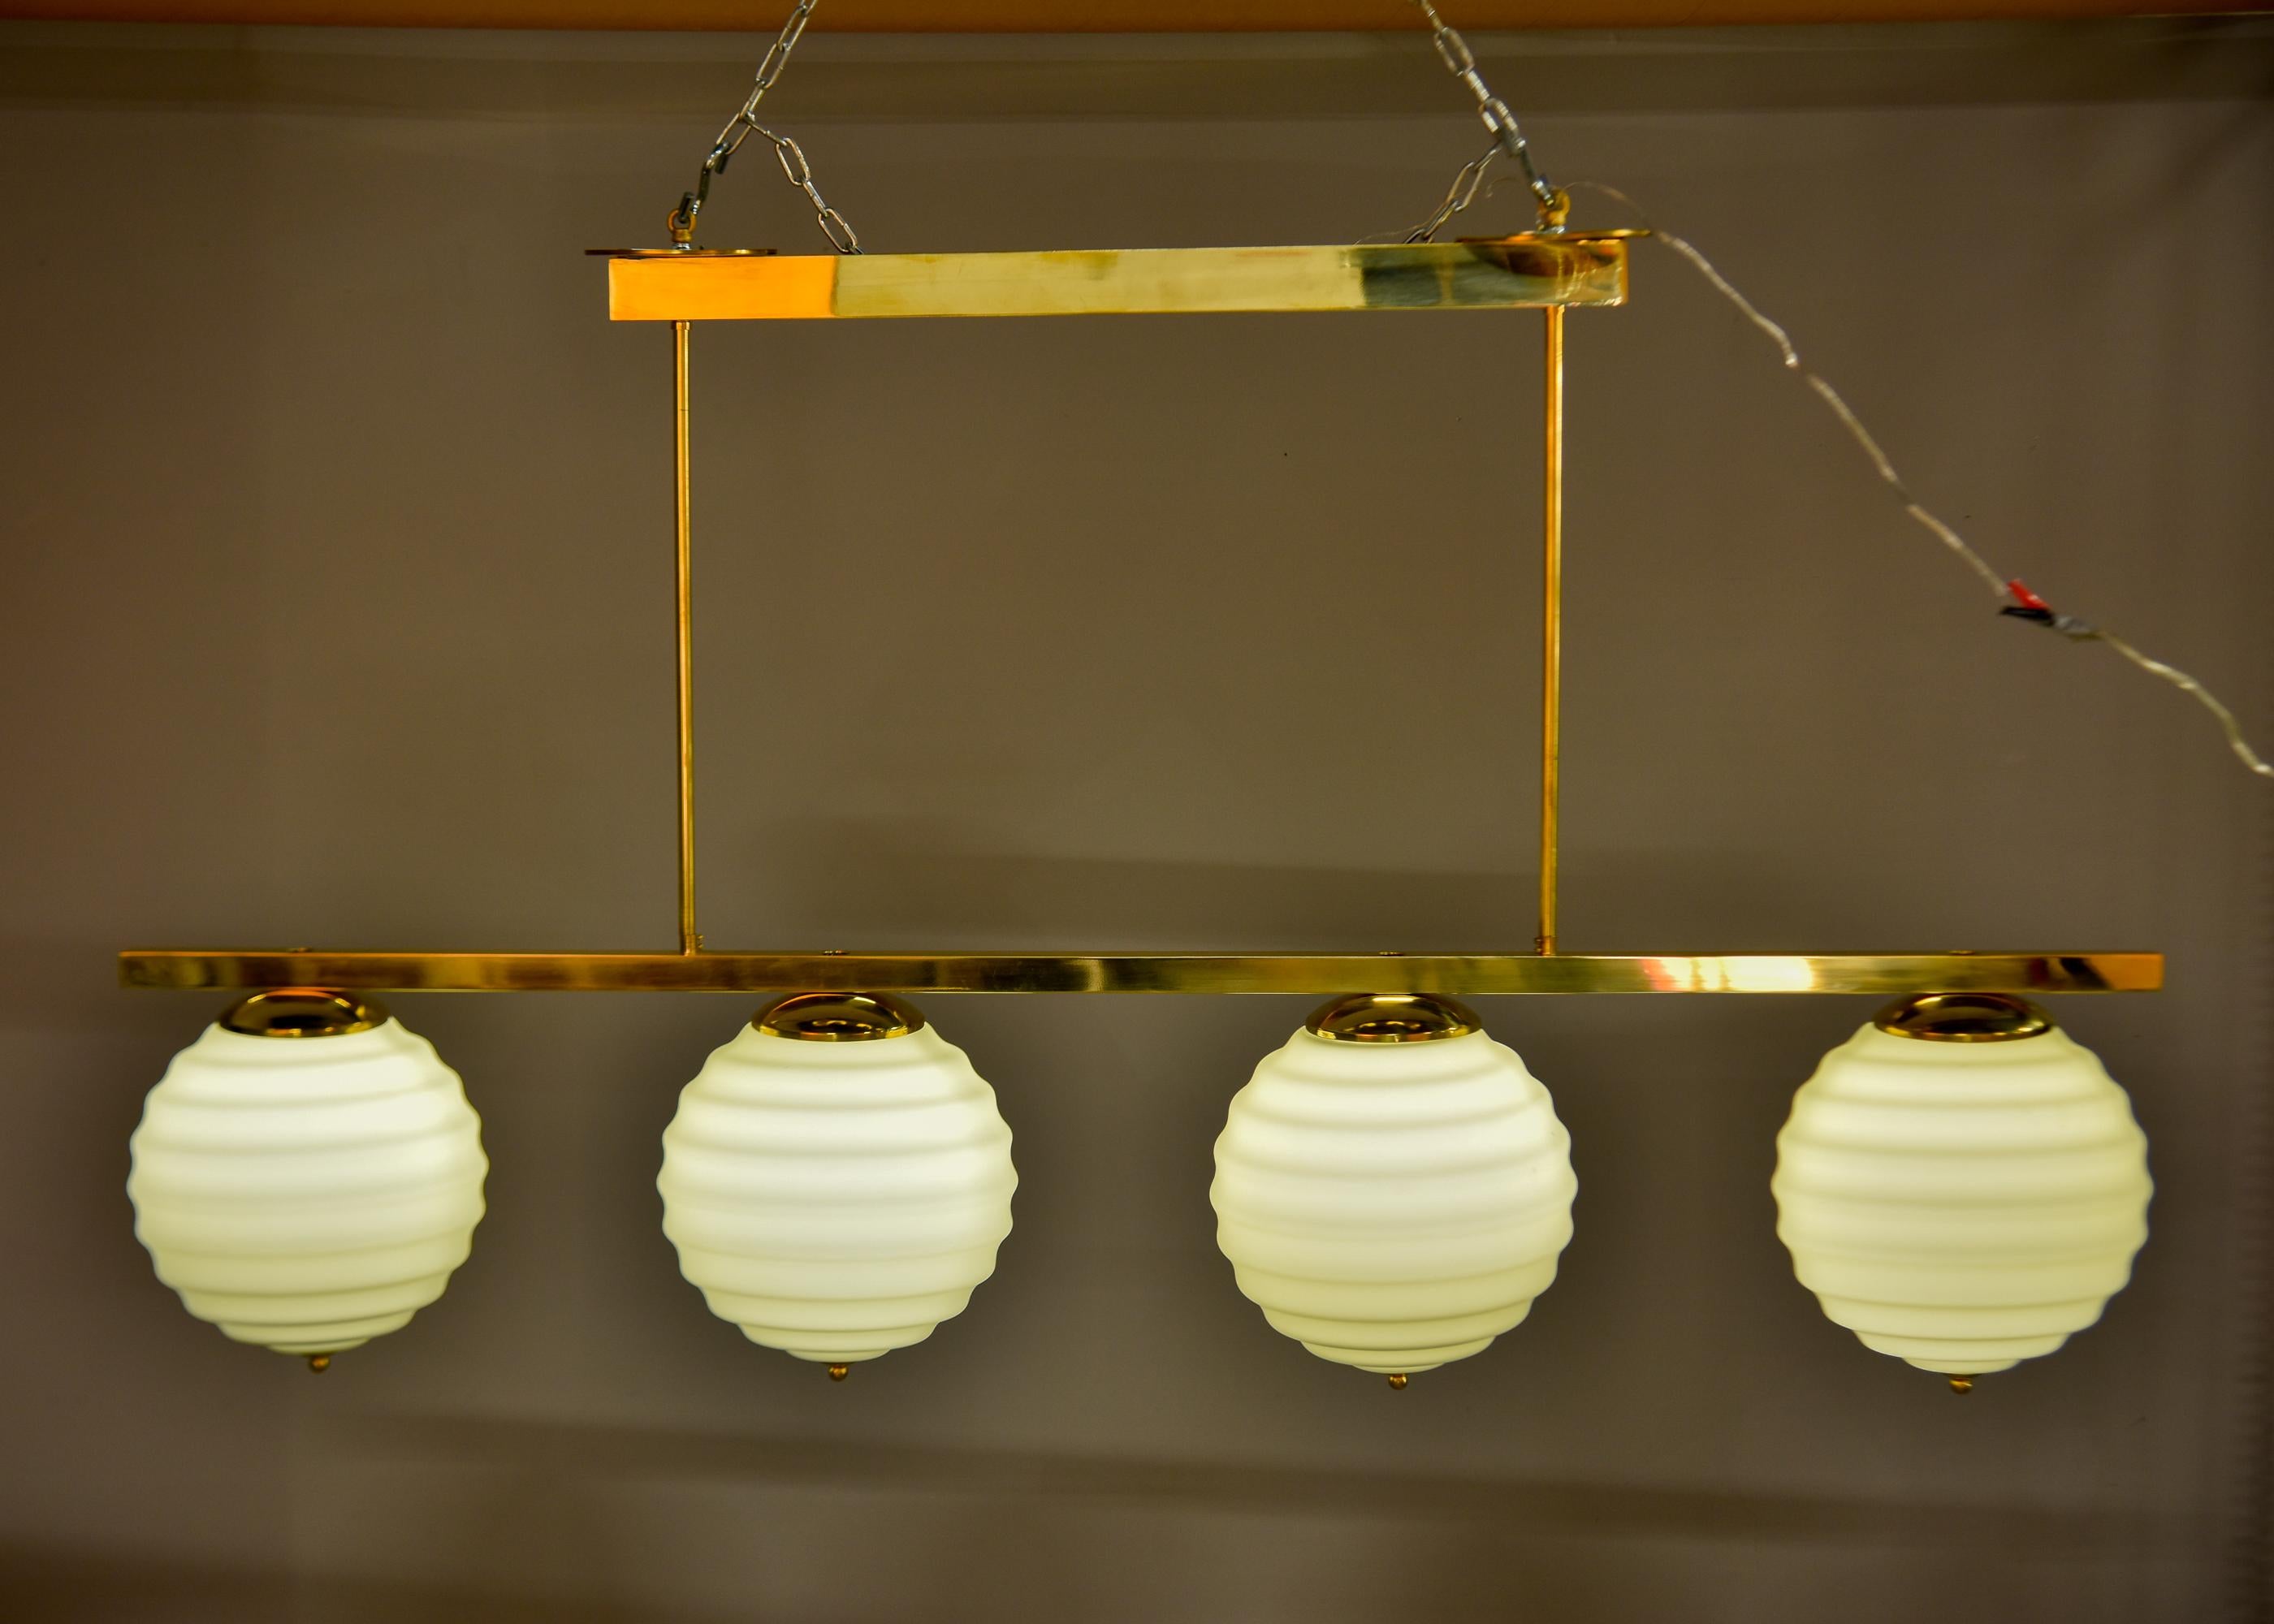 New Italian Fixture with Four Pale Taupe Globes on Horizontal Brass Bar For Sale 5